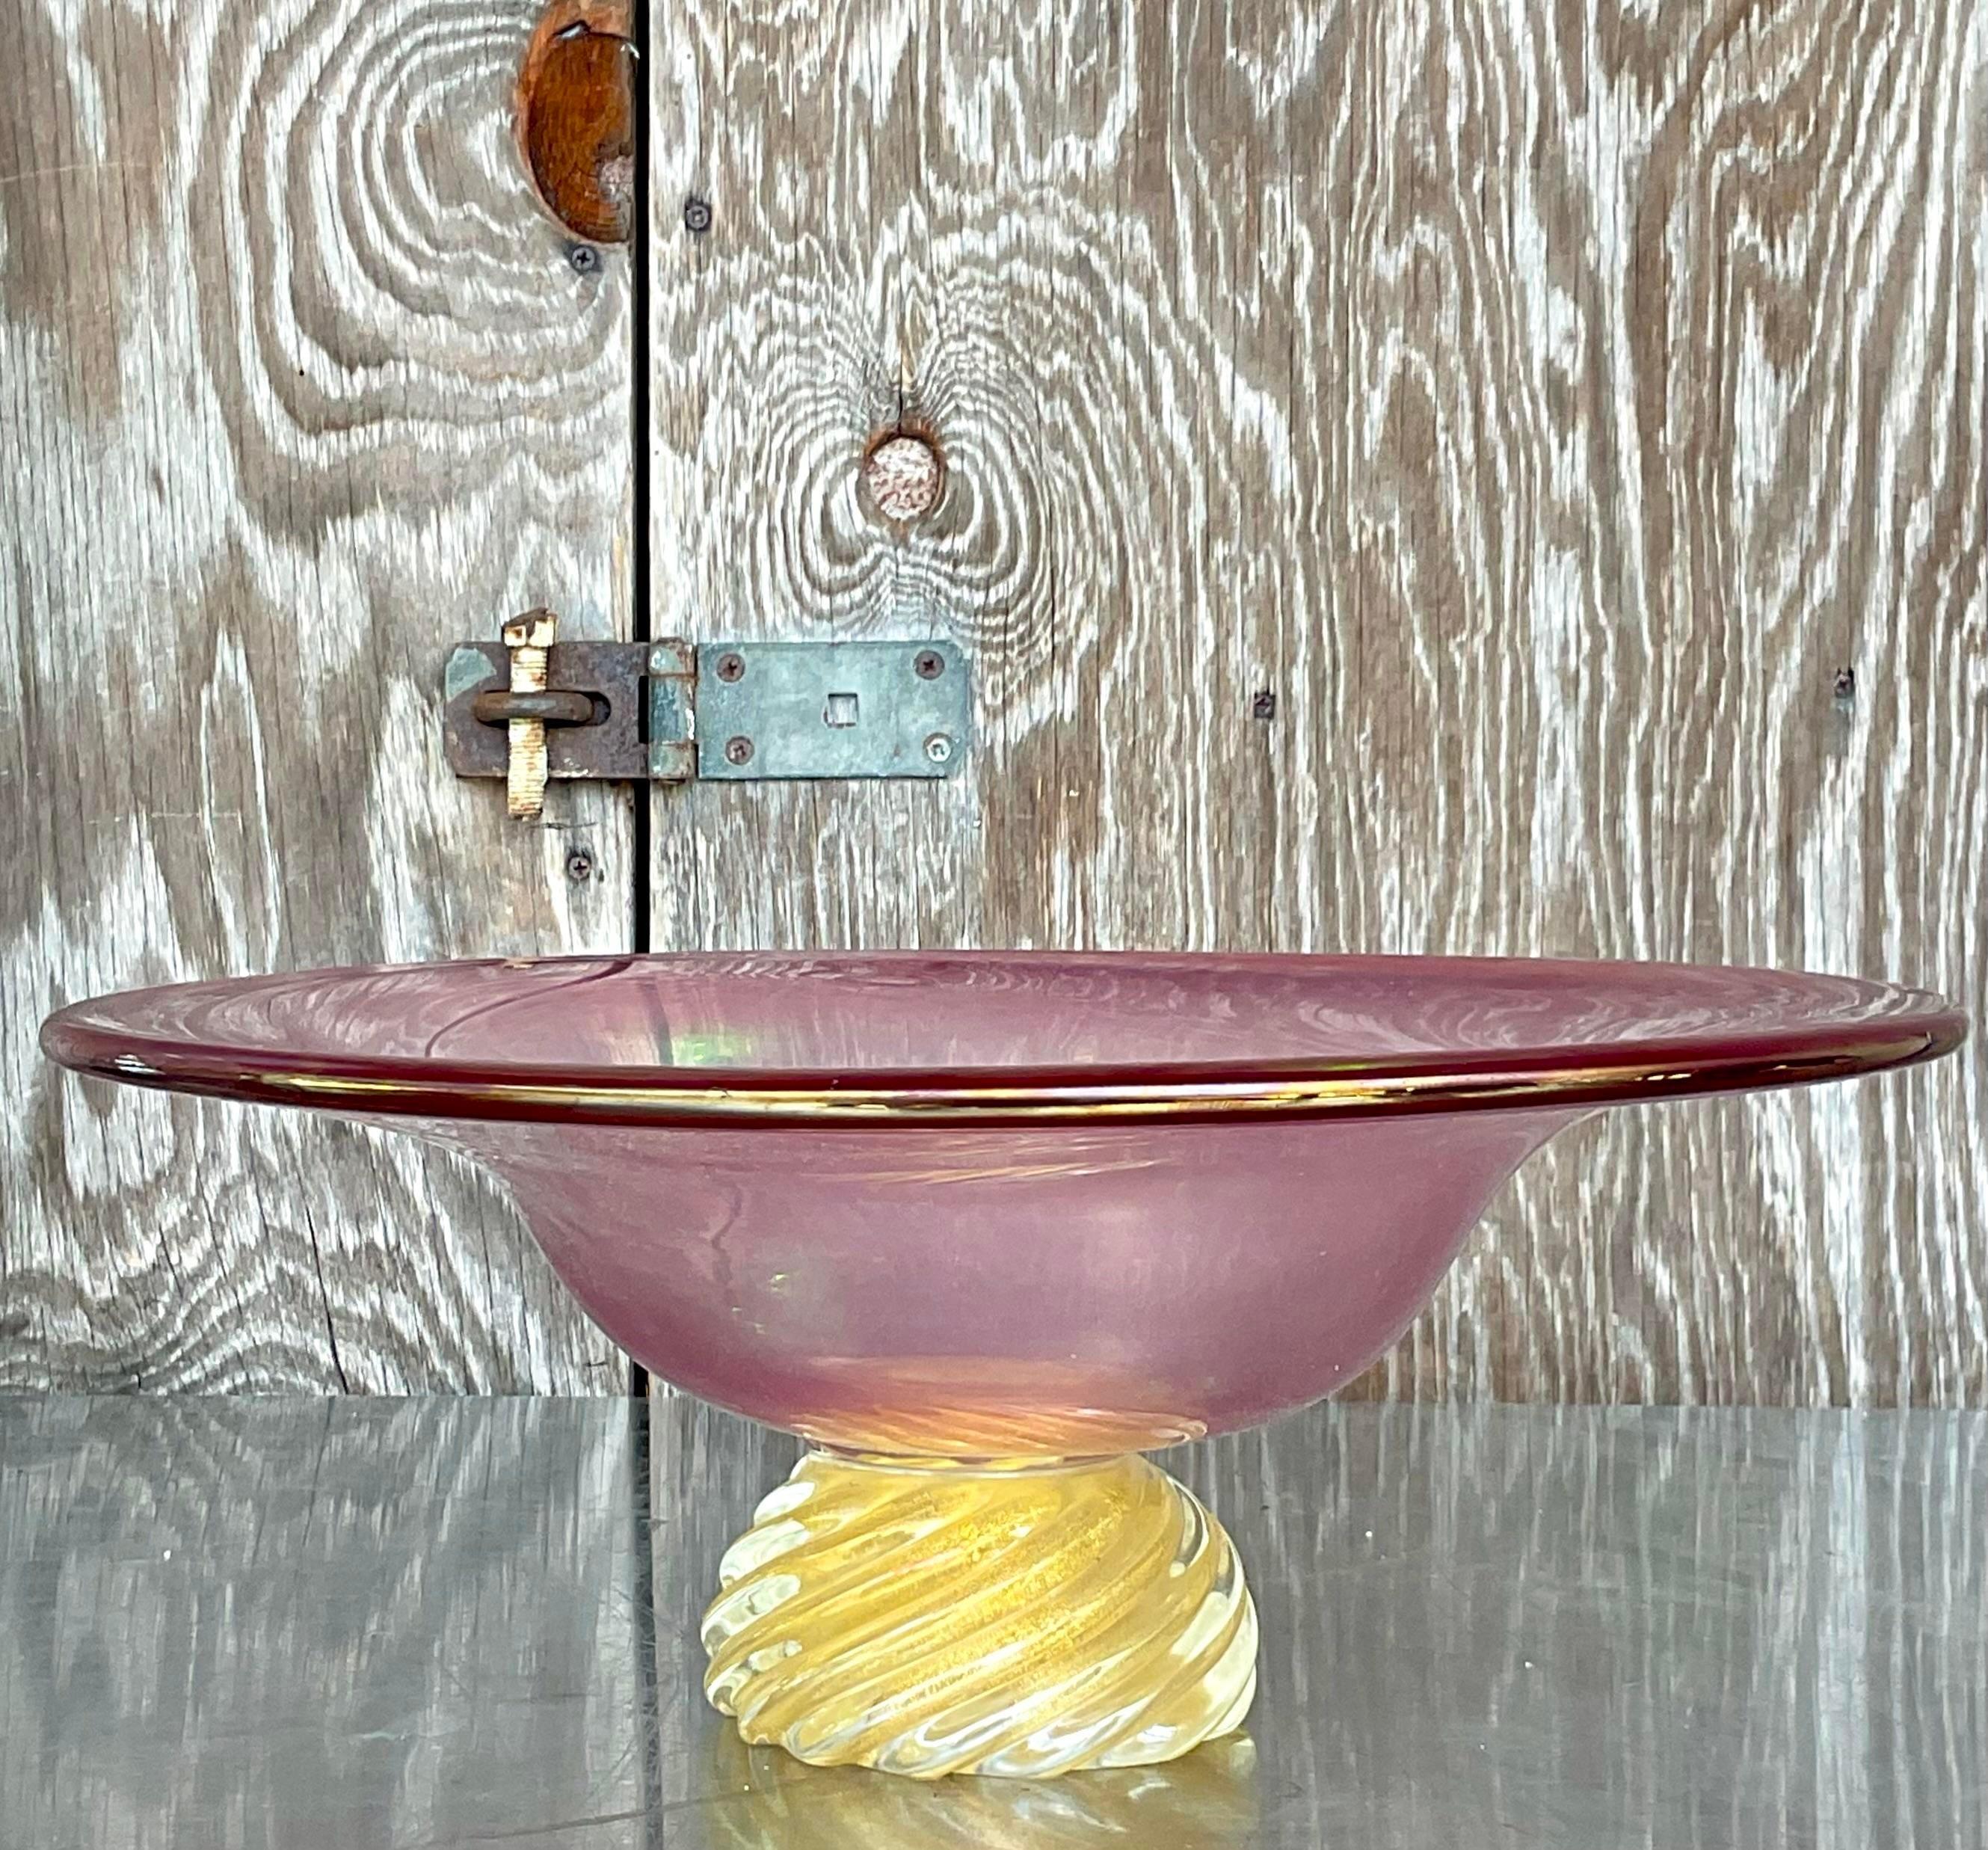 A fabulous vintage Boho Art glass bowl. Monumental in size and drama. A beautiful blown glass composition in a chic pink and gold combo. Acquired from a Palm Beach estate.